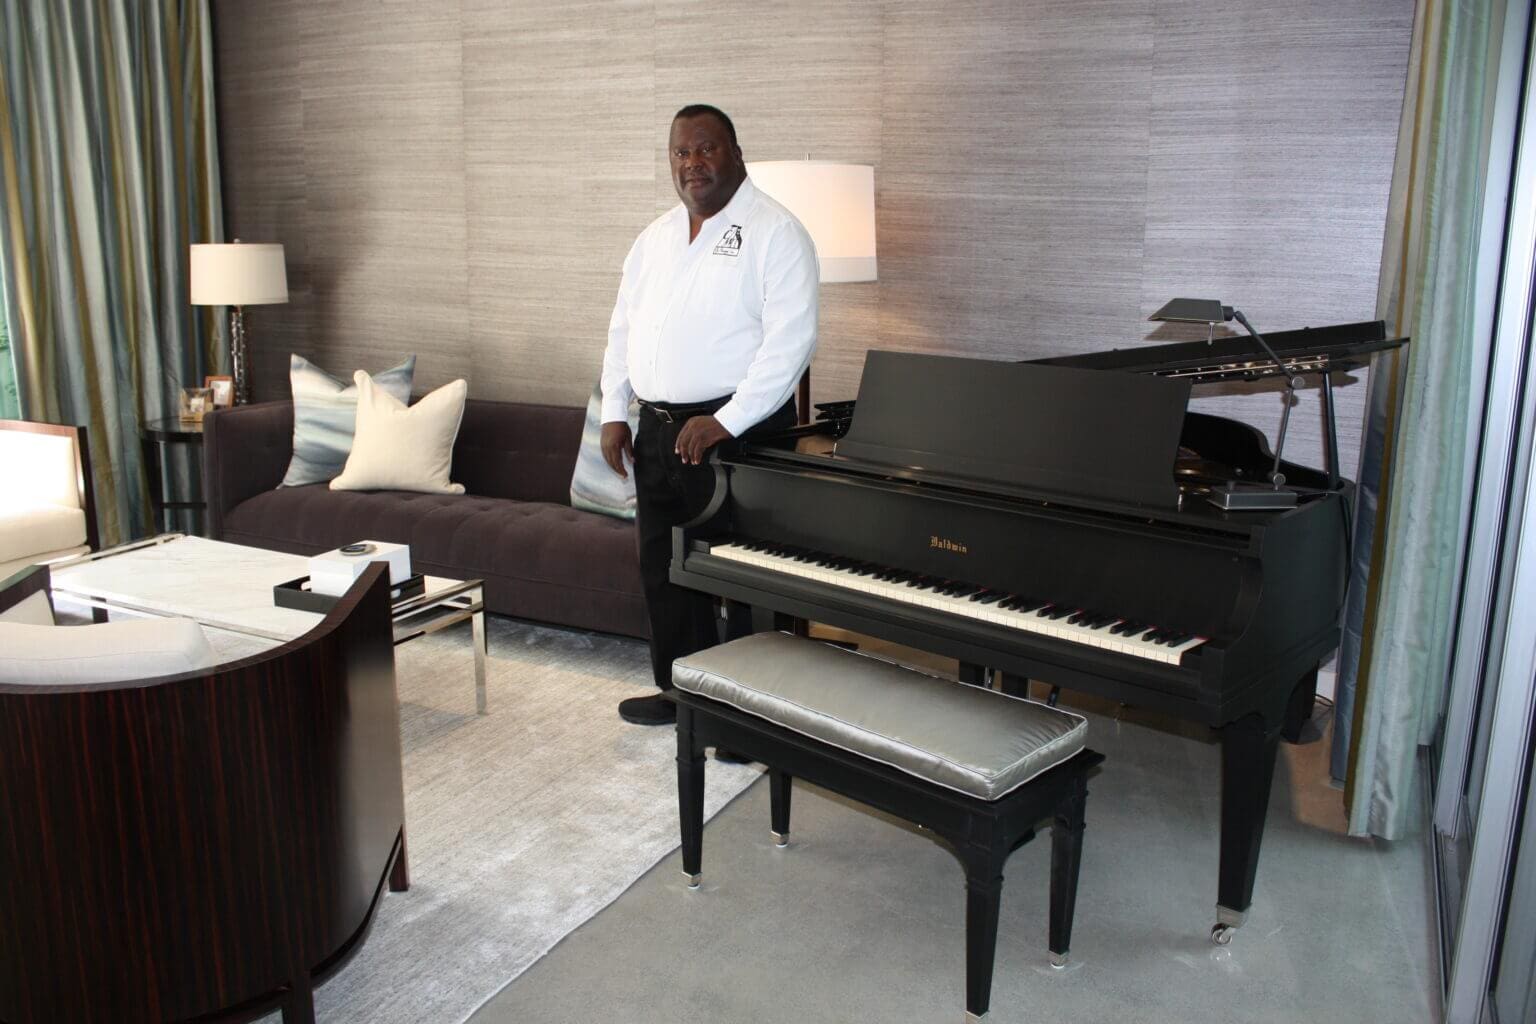 A man standing in front of a piano.